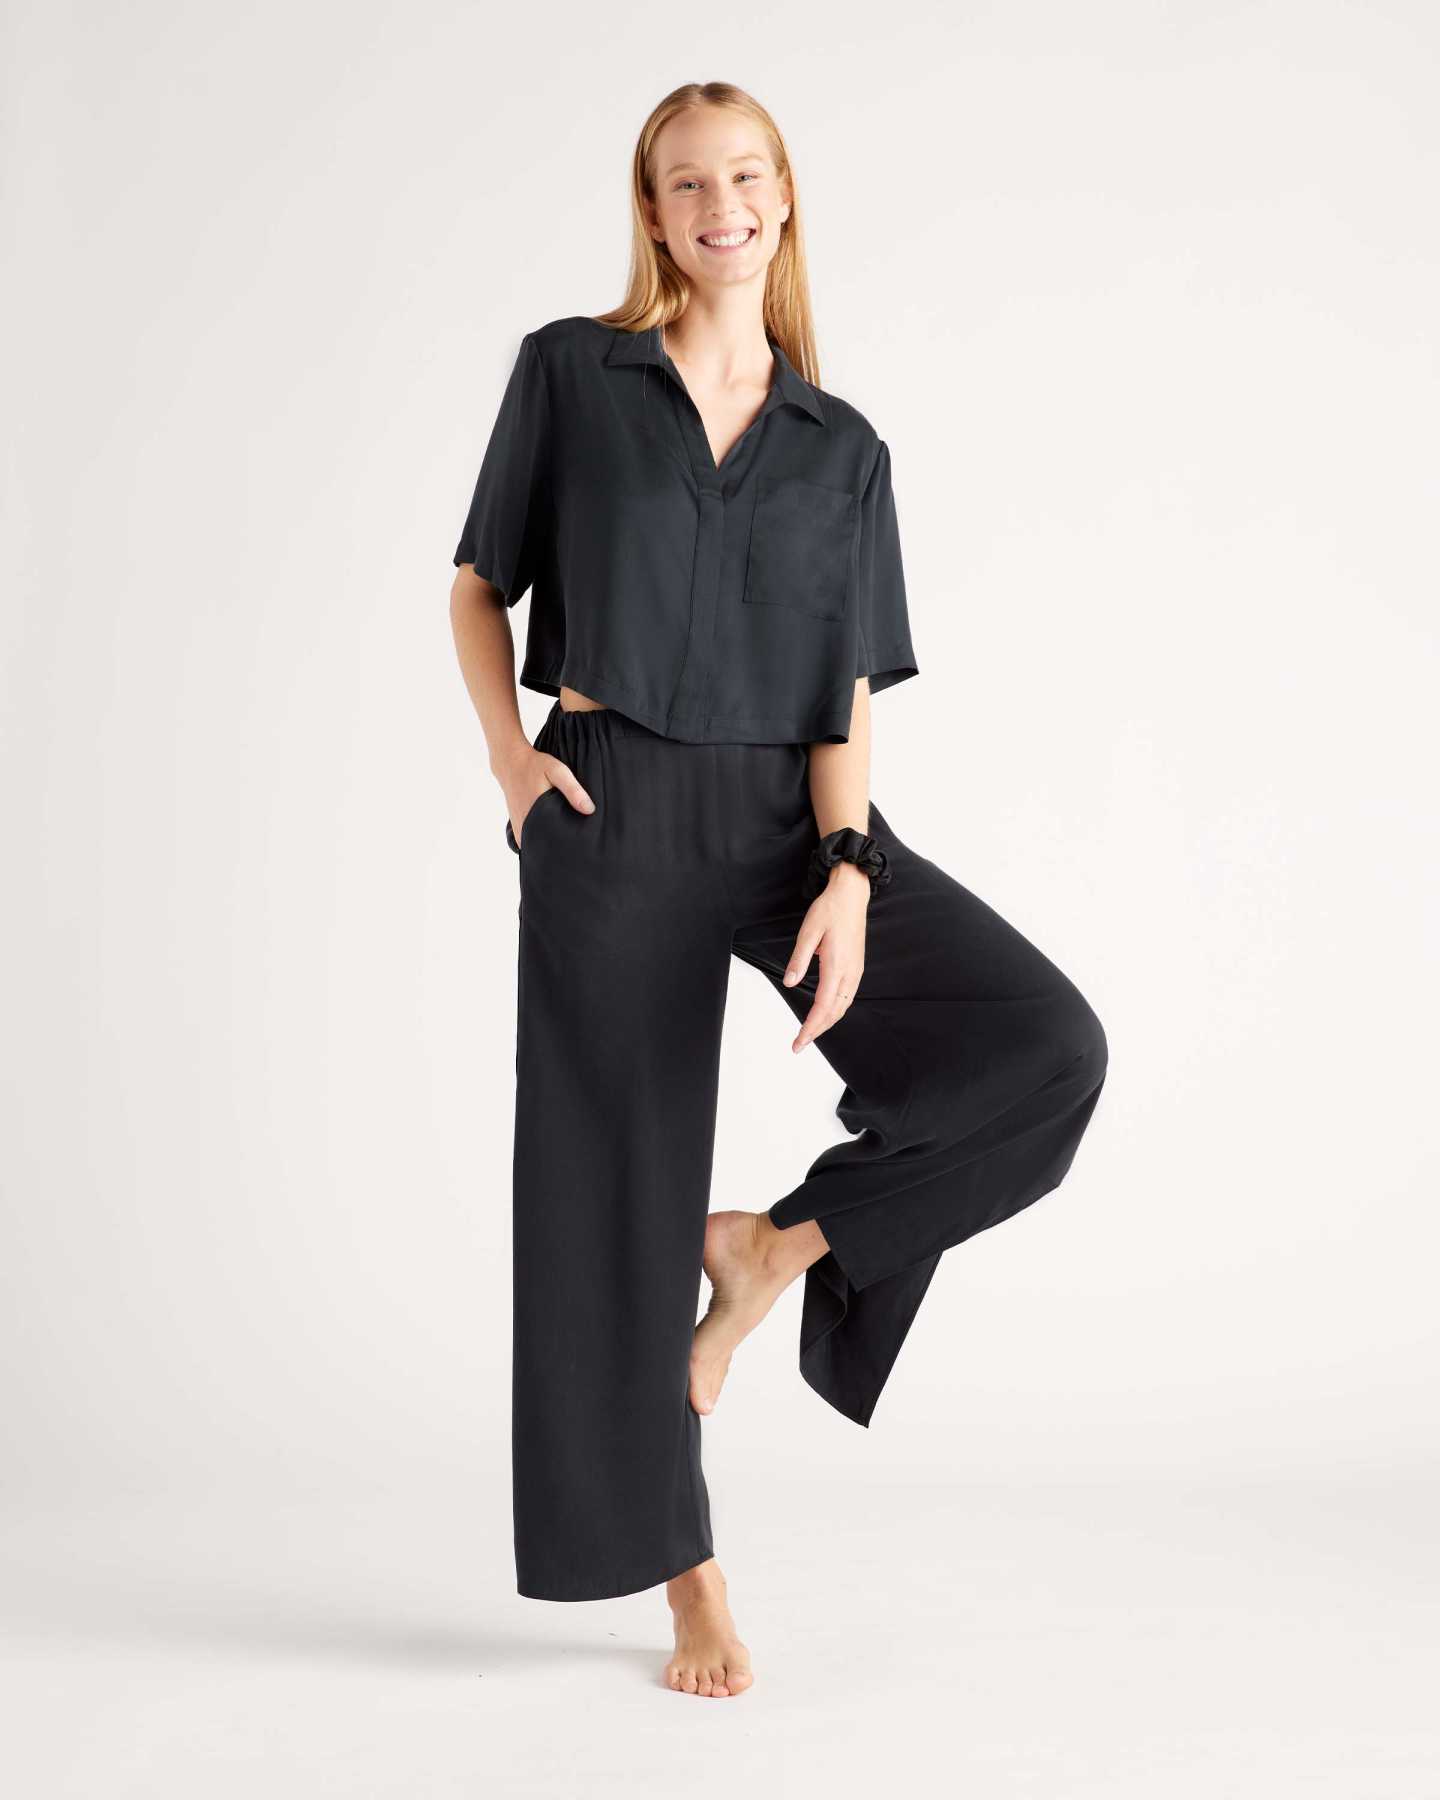 You May Also Like - 100% Washable Silk Button Up & Pants Pajama Set - Black